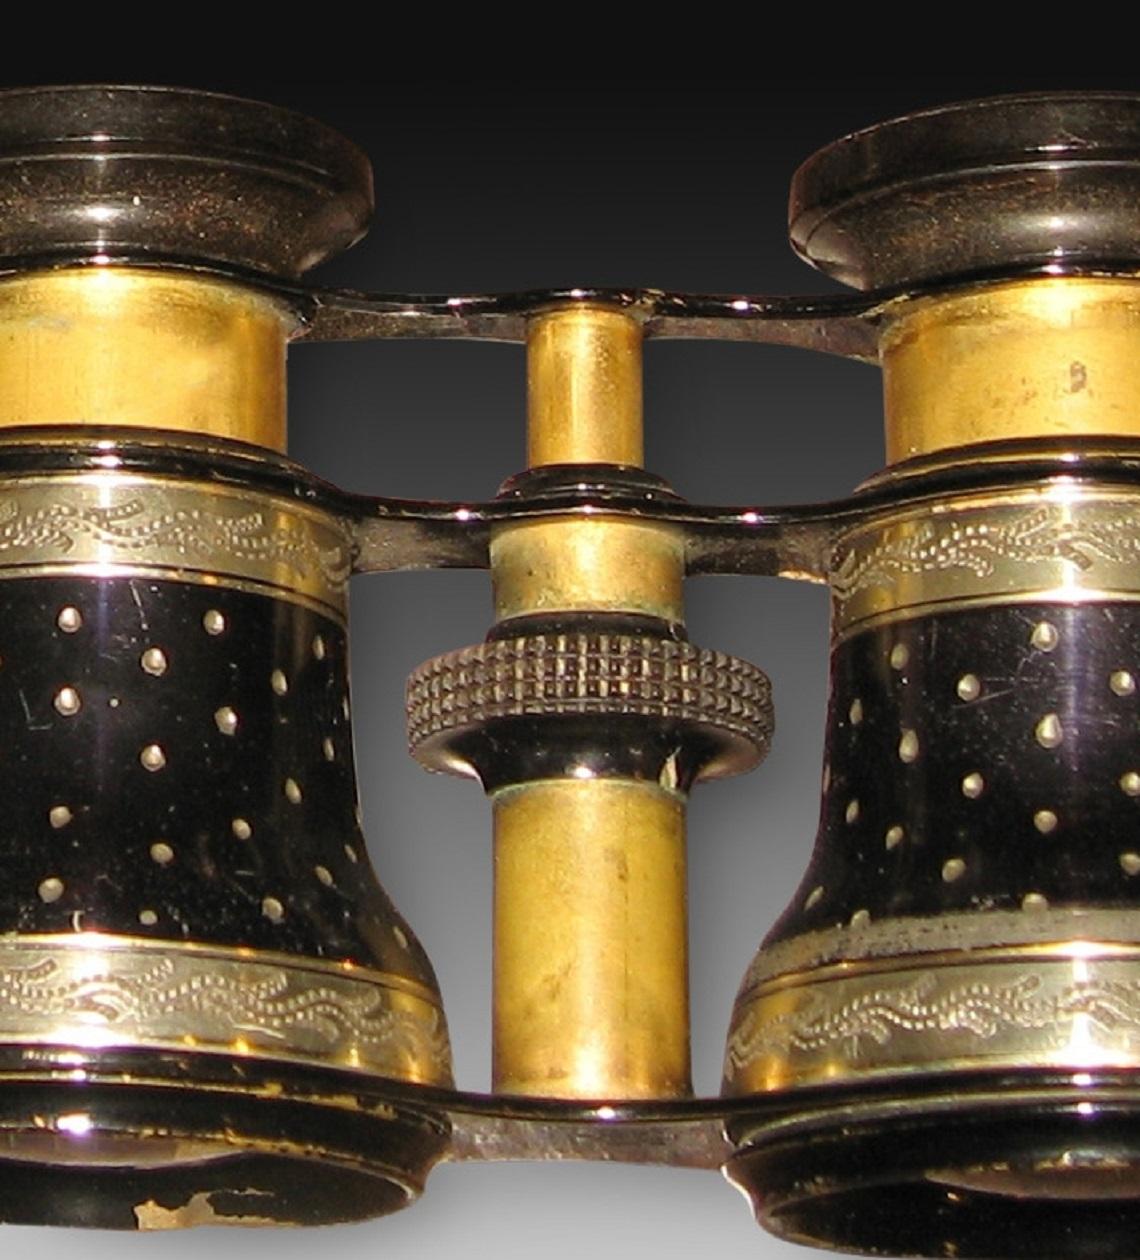 Theater binoculars or binoculars. Metal, enamel. Towards the end of the 19th century.
Pair of binoculars or binoculars for theater or opera made of gold metal and black enamel, decorated with simple plant elements and dots. Like the impertinent,